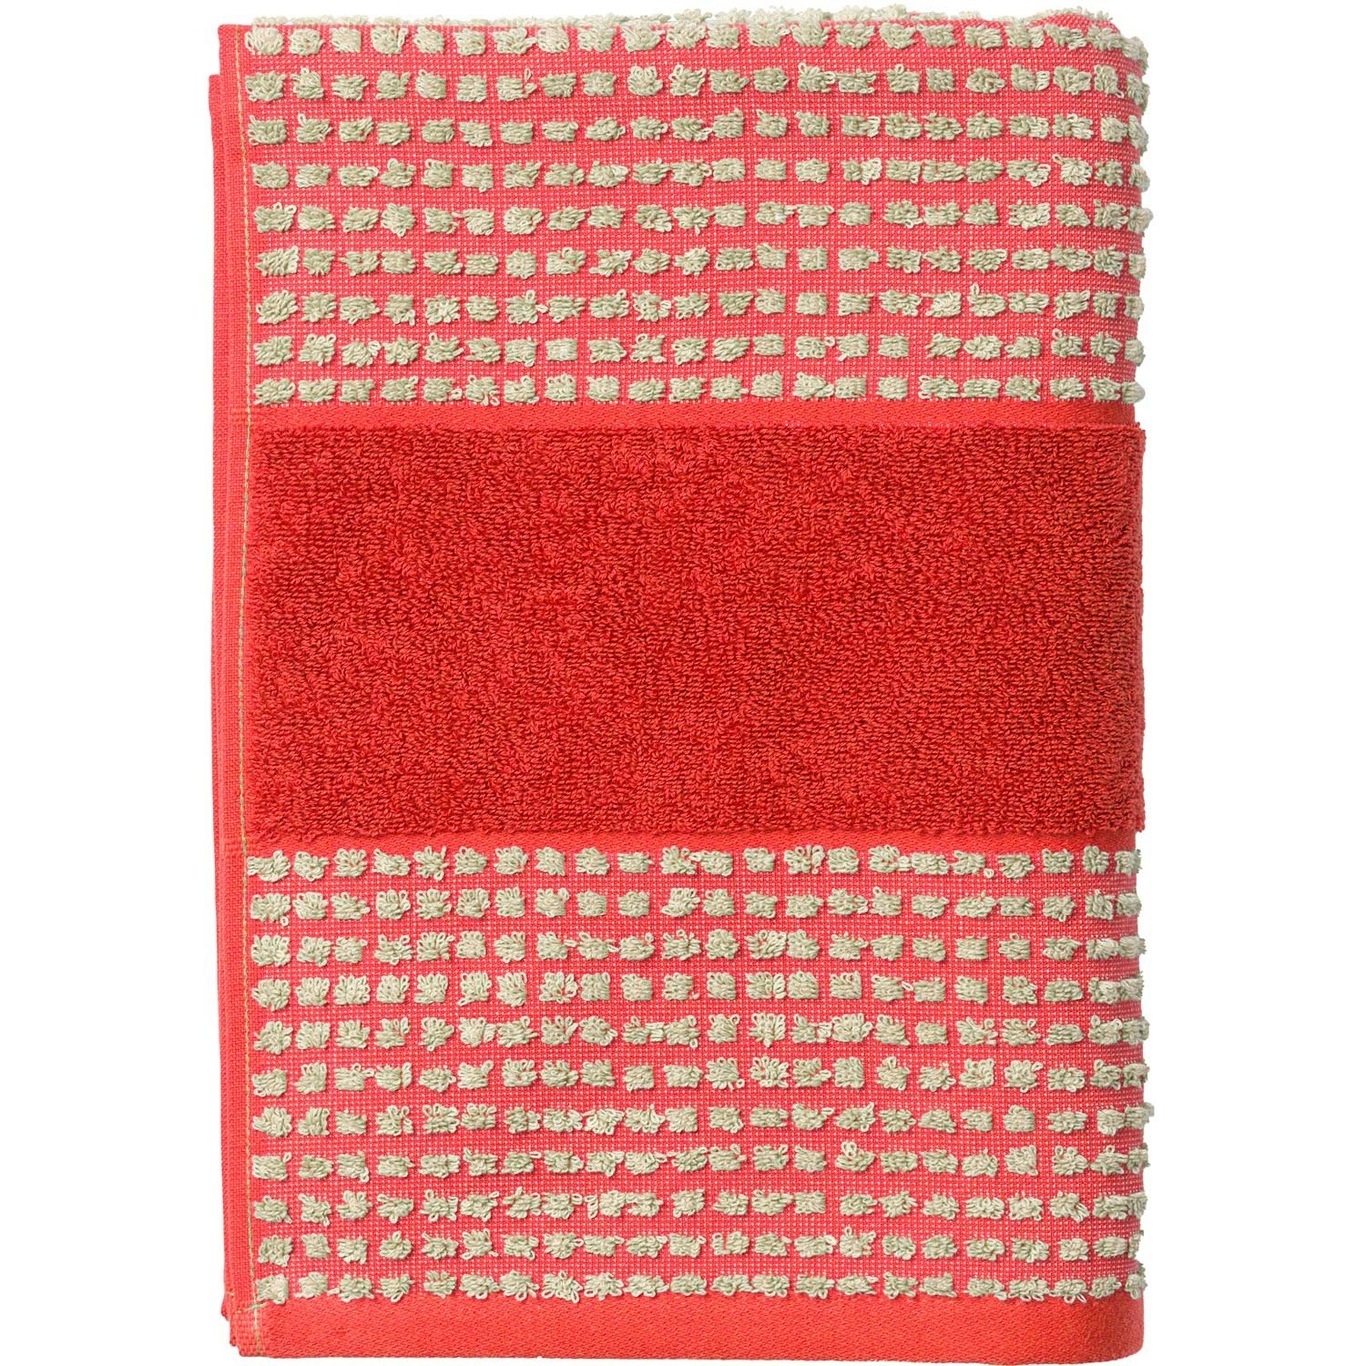 Check Towel 140x70 cm, Red/Sand